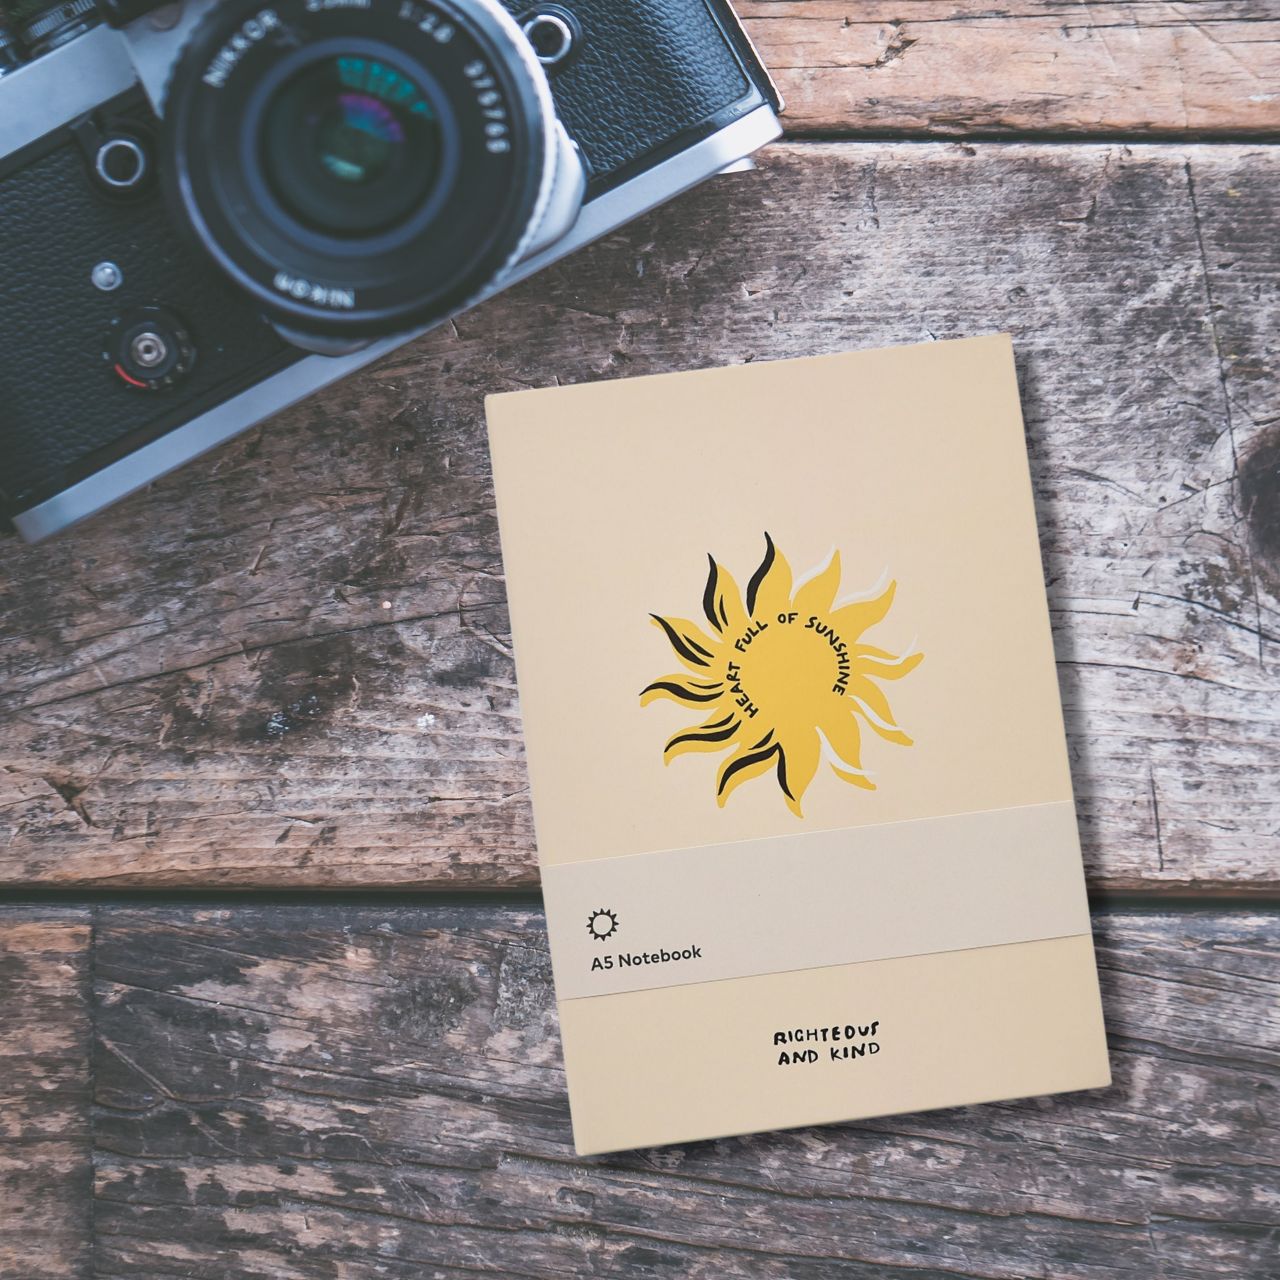 Righteous & Kind A5 Notebook  A stylish notebook that would make a beautiful gift for those who love to note down their thoughts or doodle. With a gold sun design, this would make a cute addition to any free spirit's stationary collection.